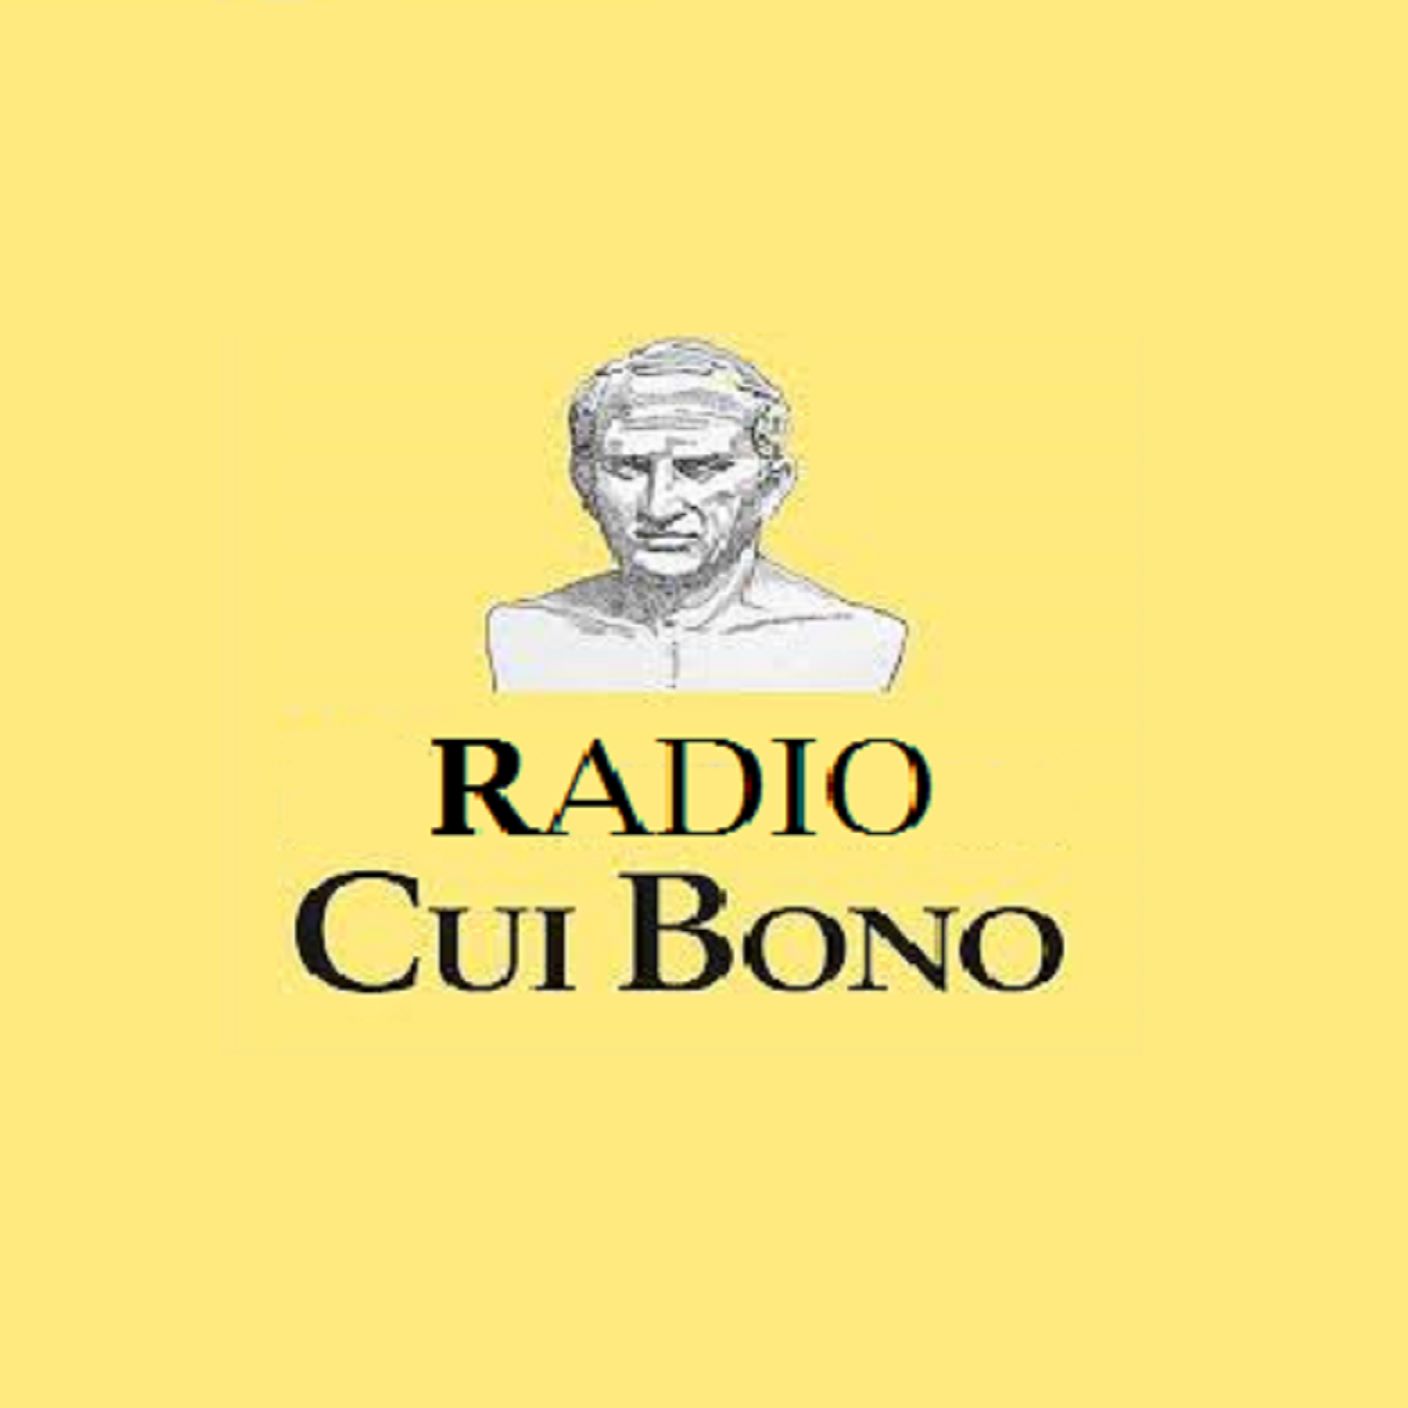 Stream Radio Cui bono | Listen to podcast episodes online for free on  SoundCloud